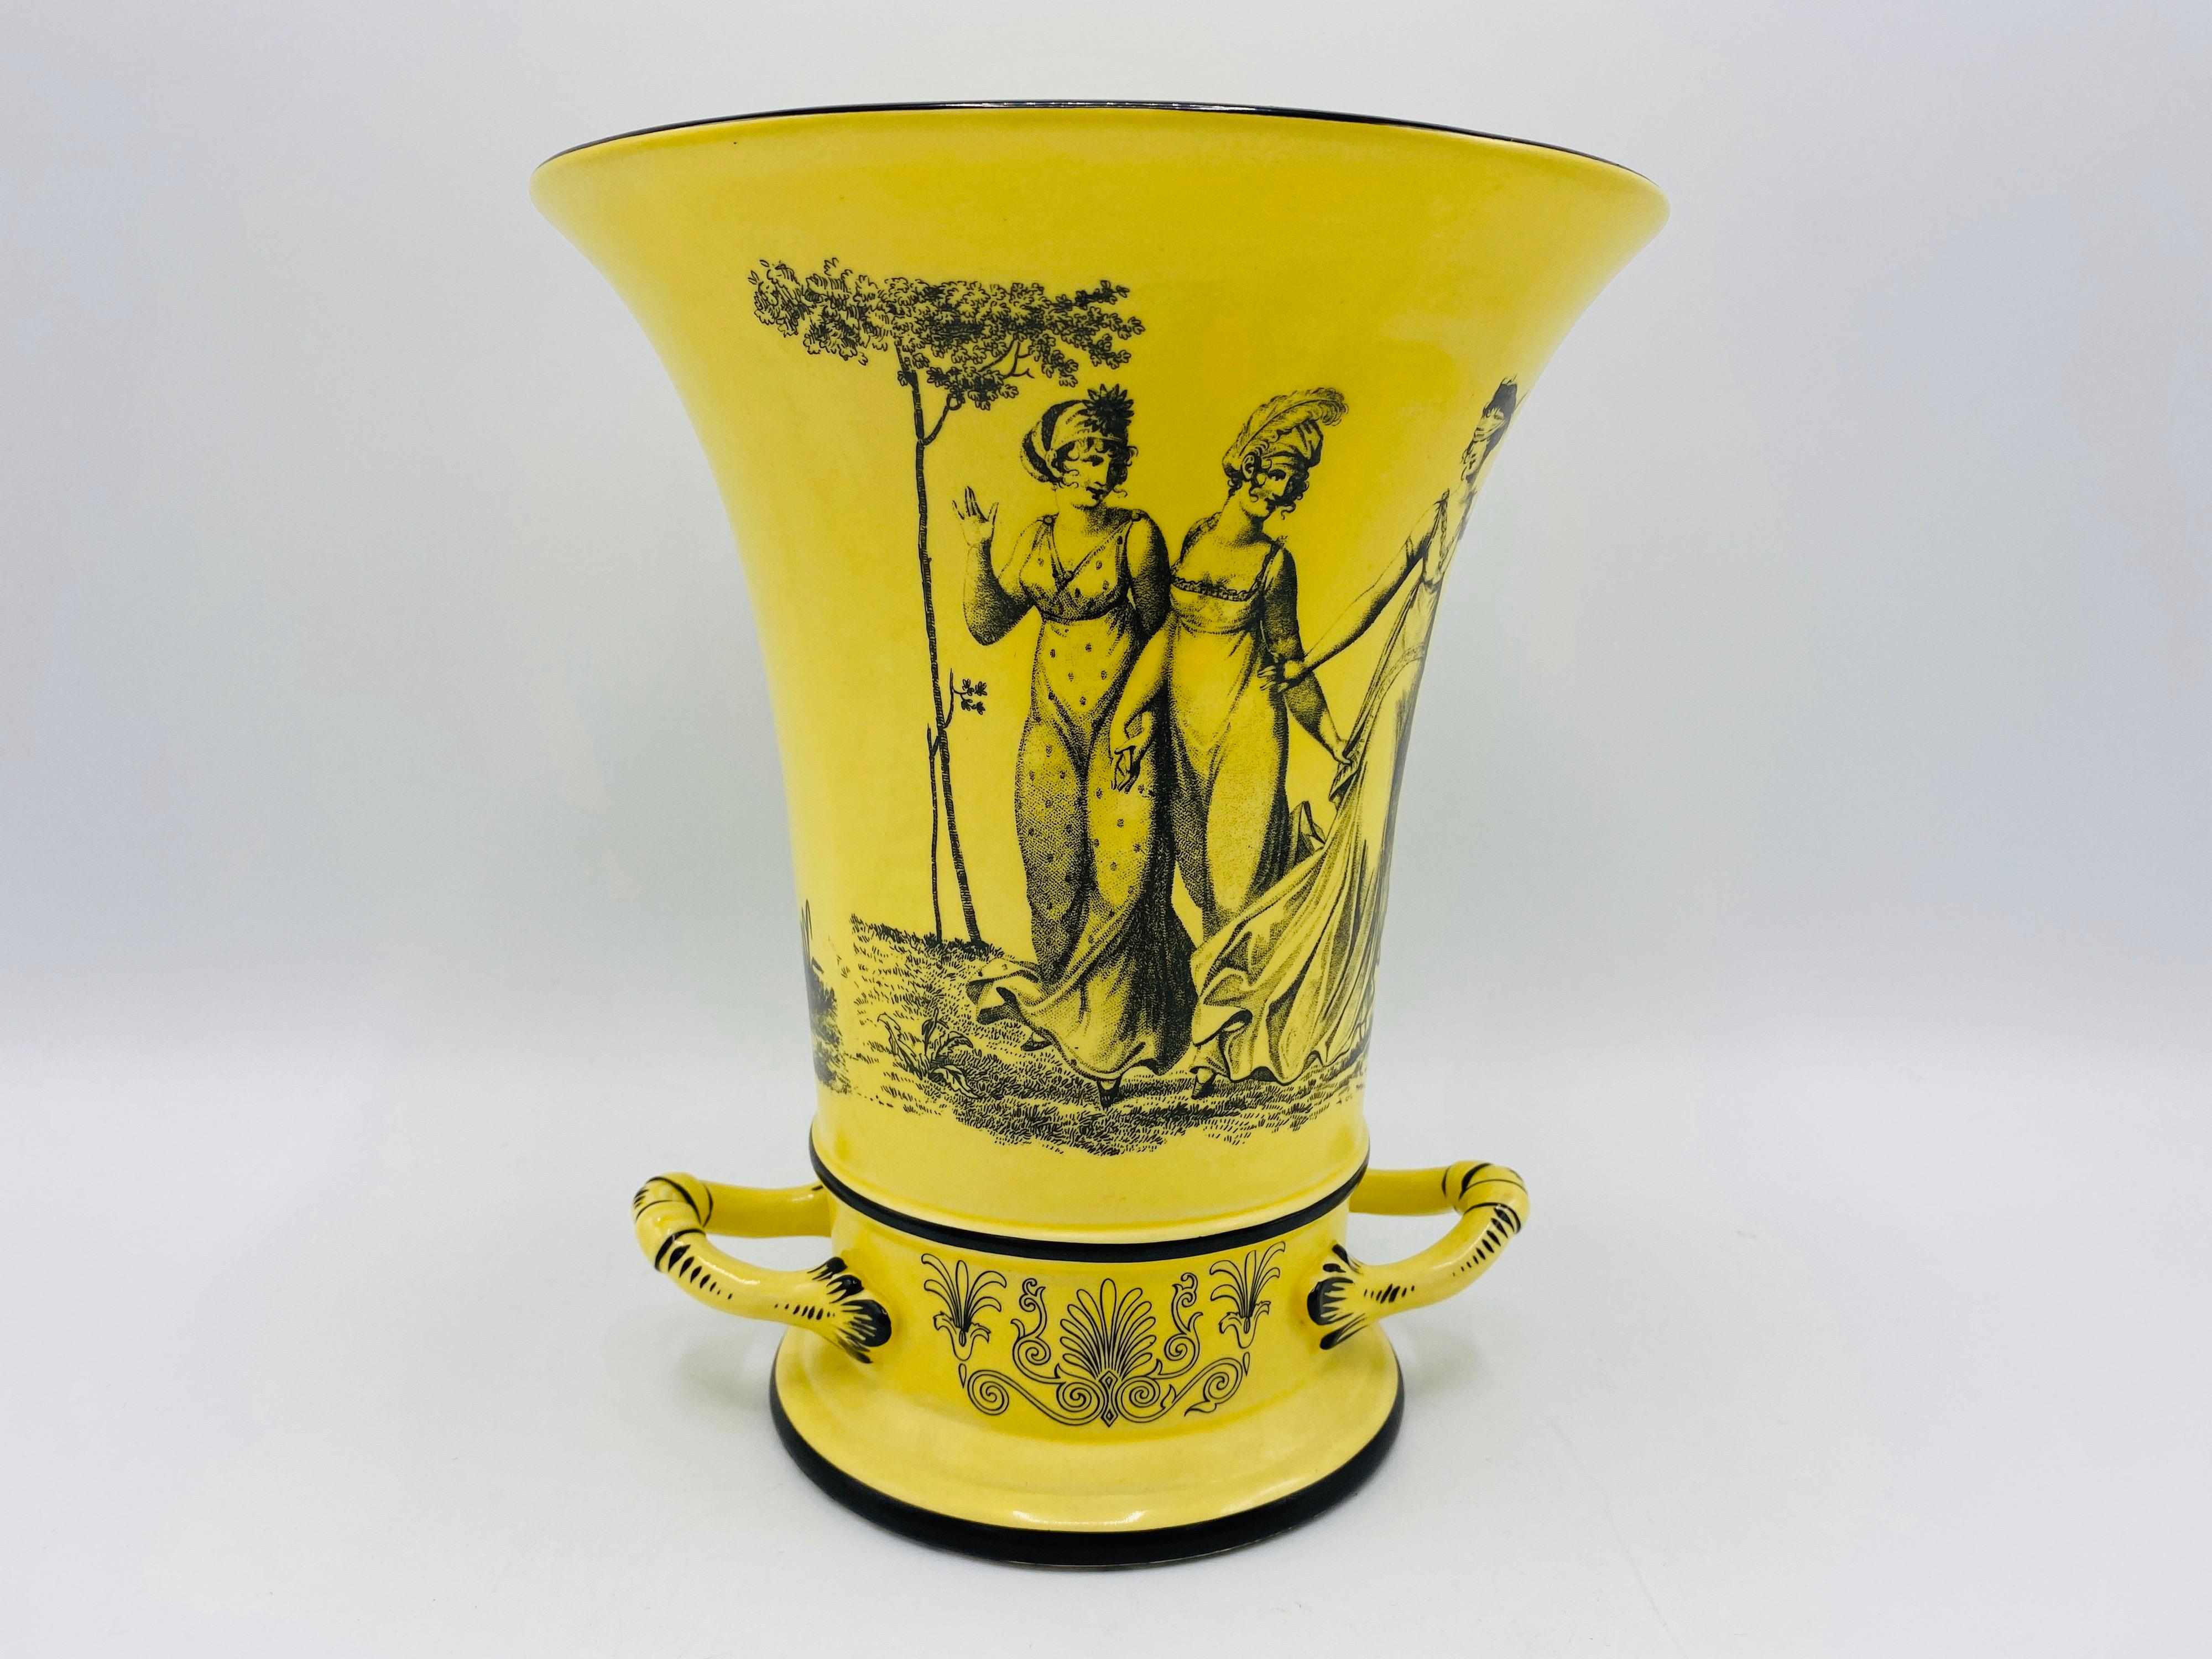 Hand-Painted Italian Mottahedeh Yellow and Black Toile Handled Urn Vases, Pair, 1960s For Sale